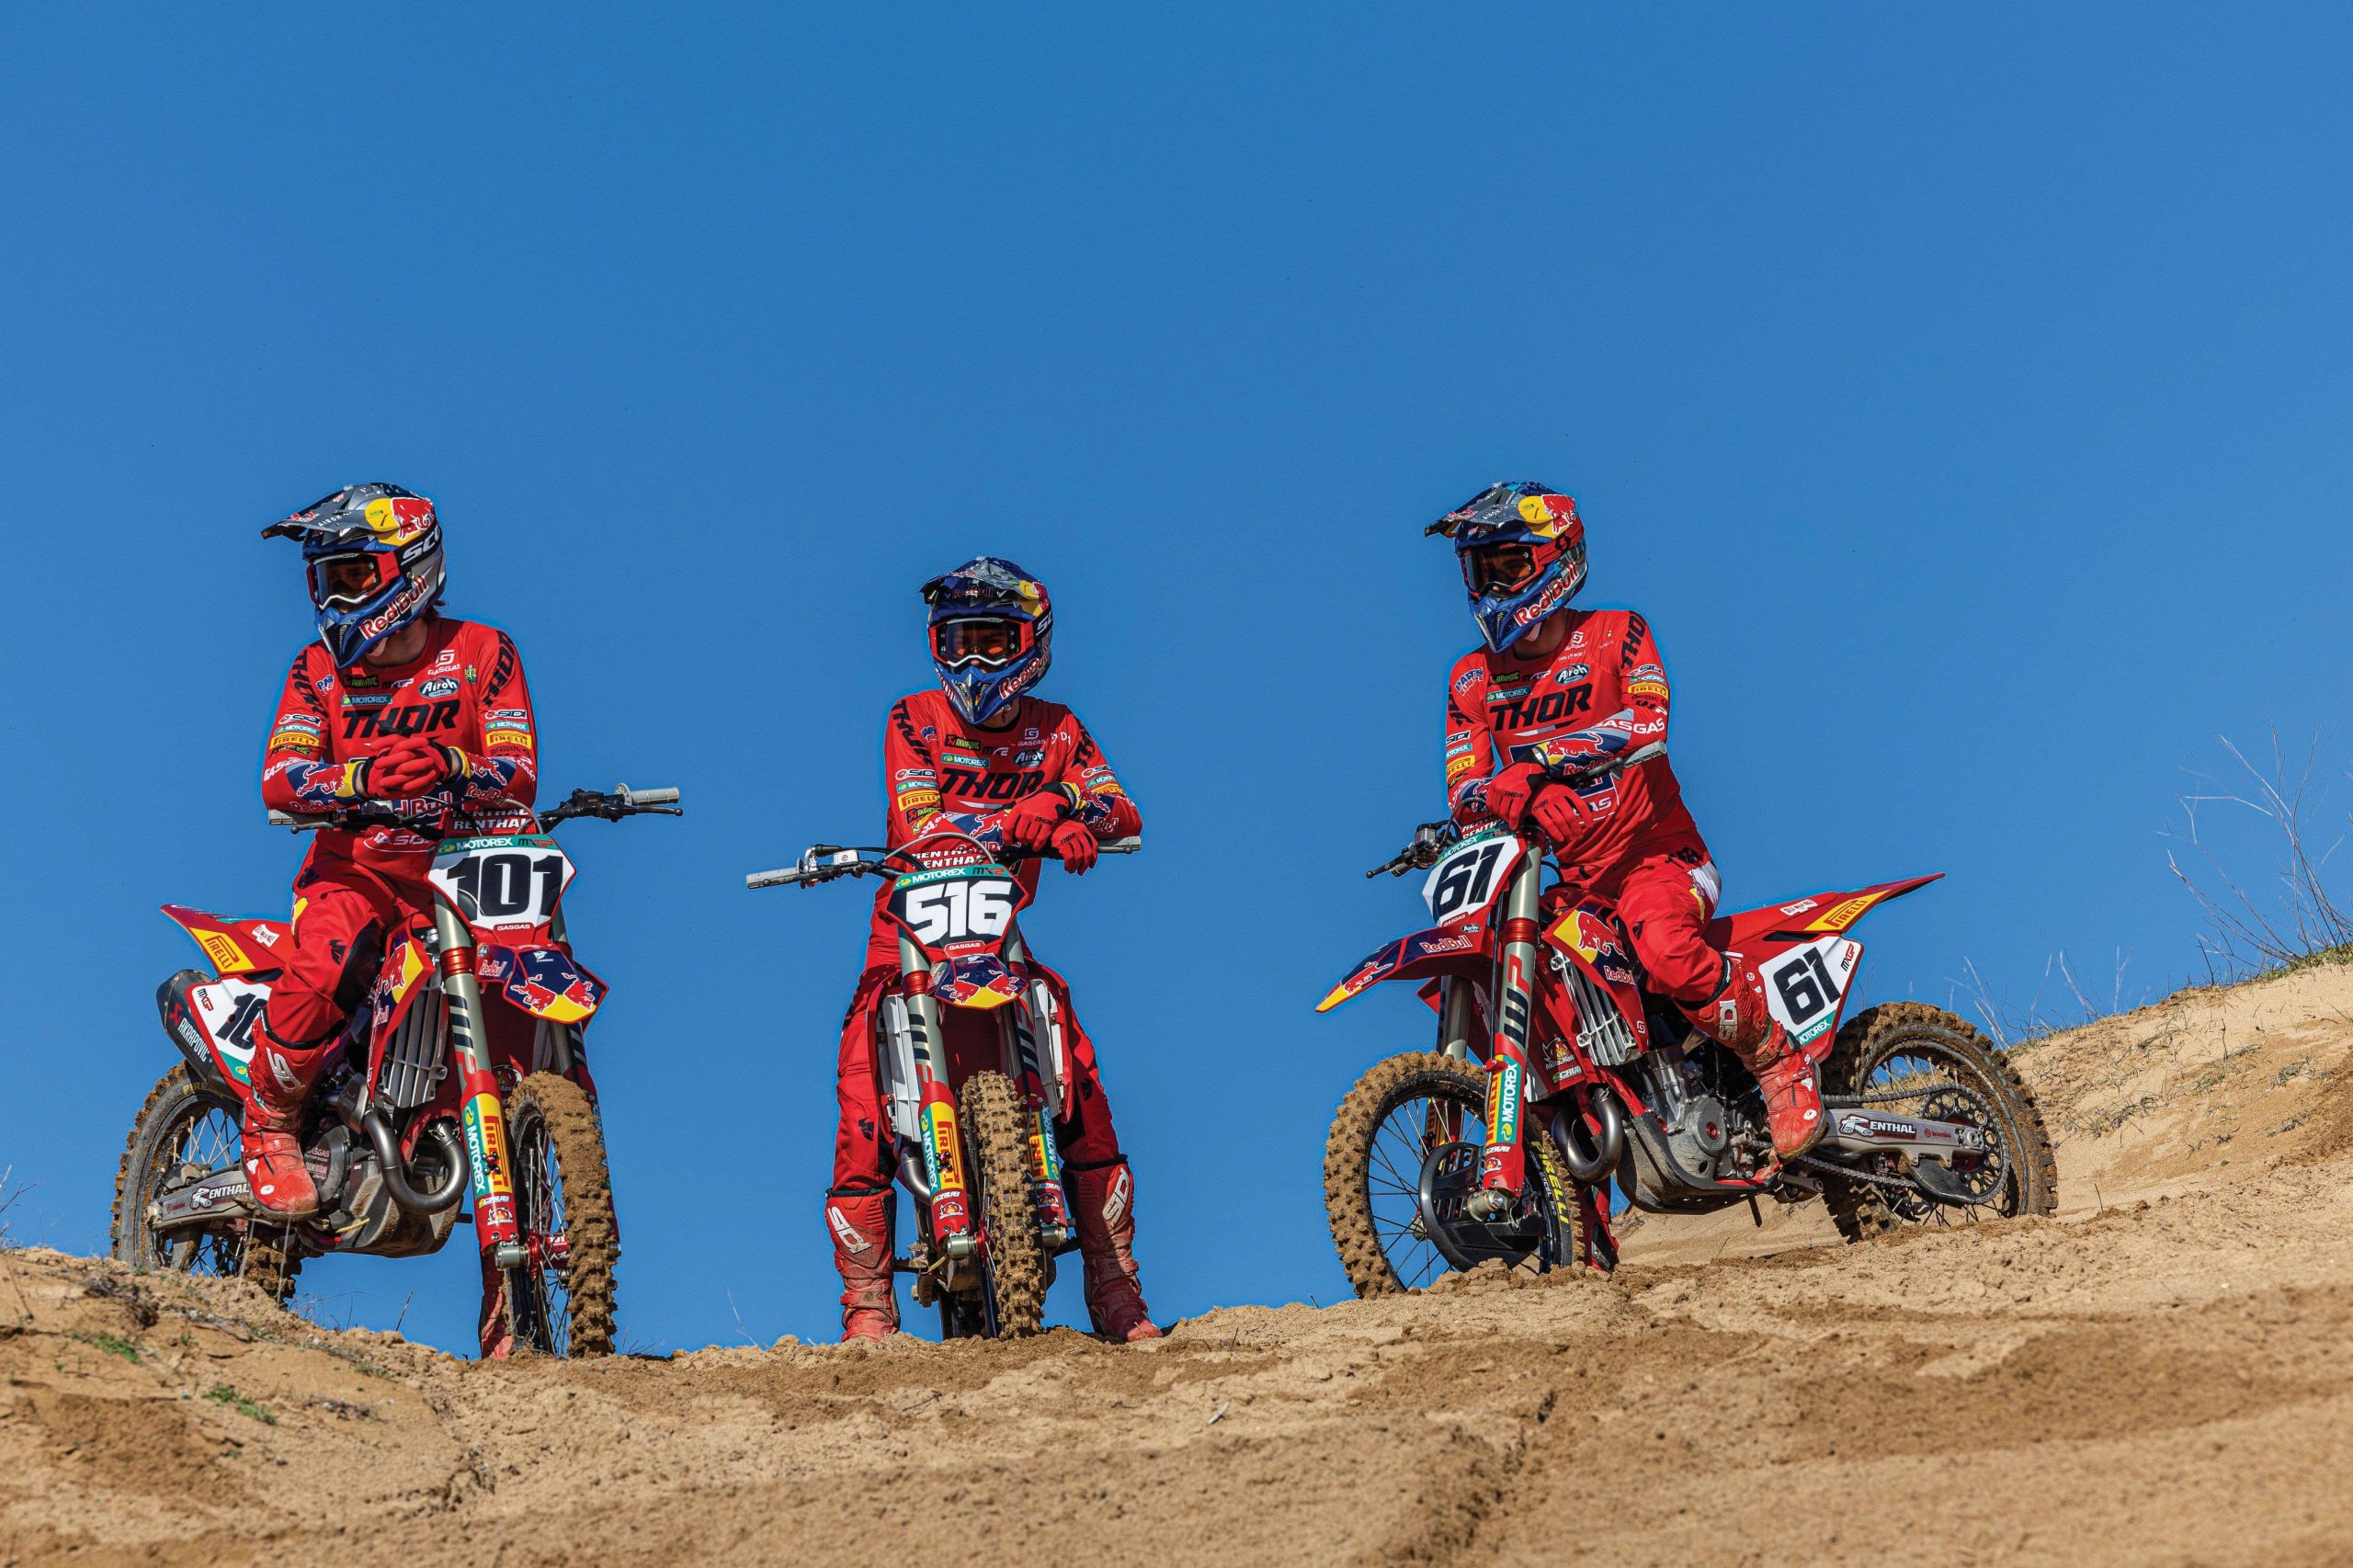 RED BULL GASGAS FACTORY RACING EXCITED TO CONTEND FOR WINS IN 2023 MXGP SEASON